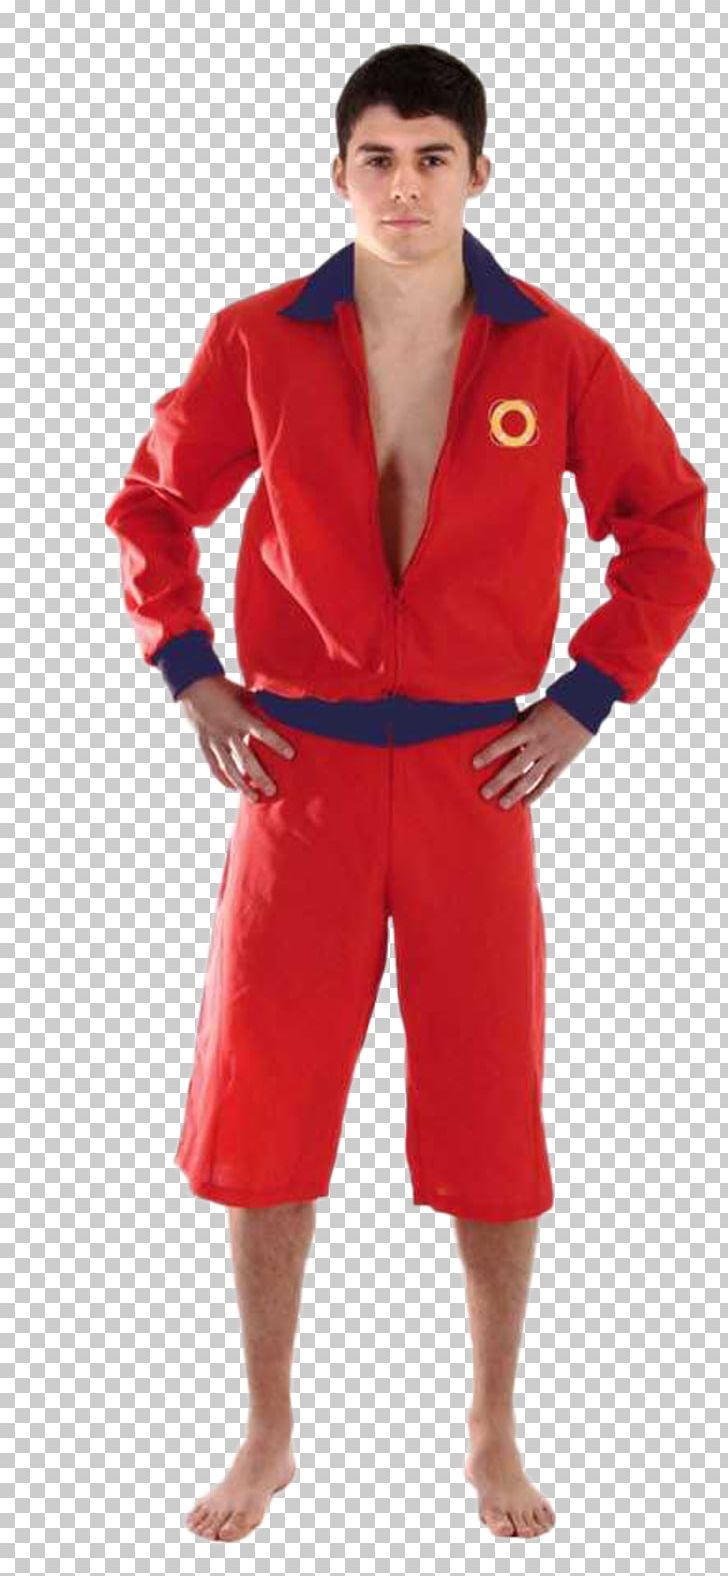 Robe Baywatch Costume Party Jacket PNG, Clipart, Baywatch, Clothing, Costume, Costume Party, Dress Free PNG Download